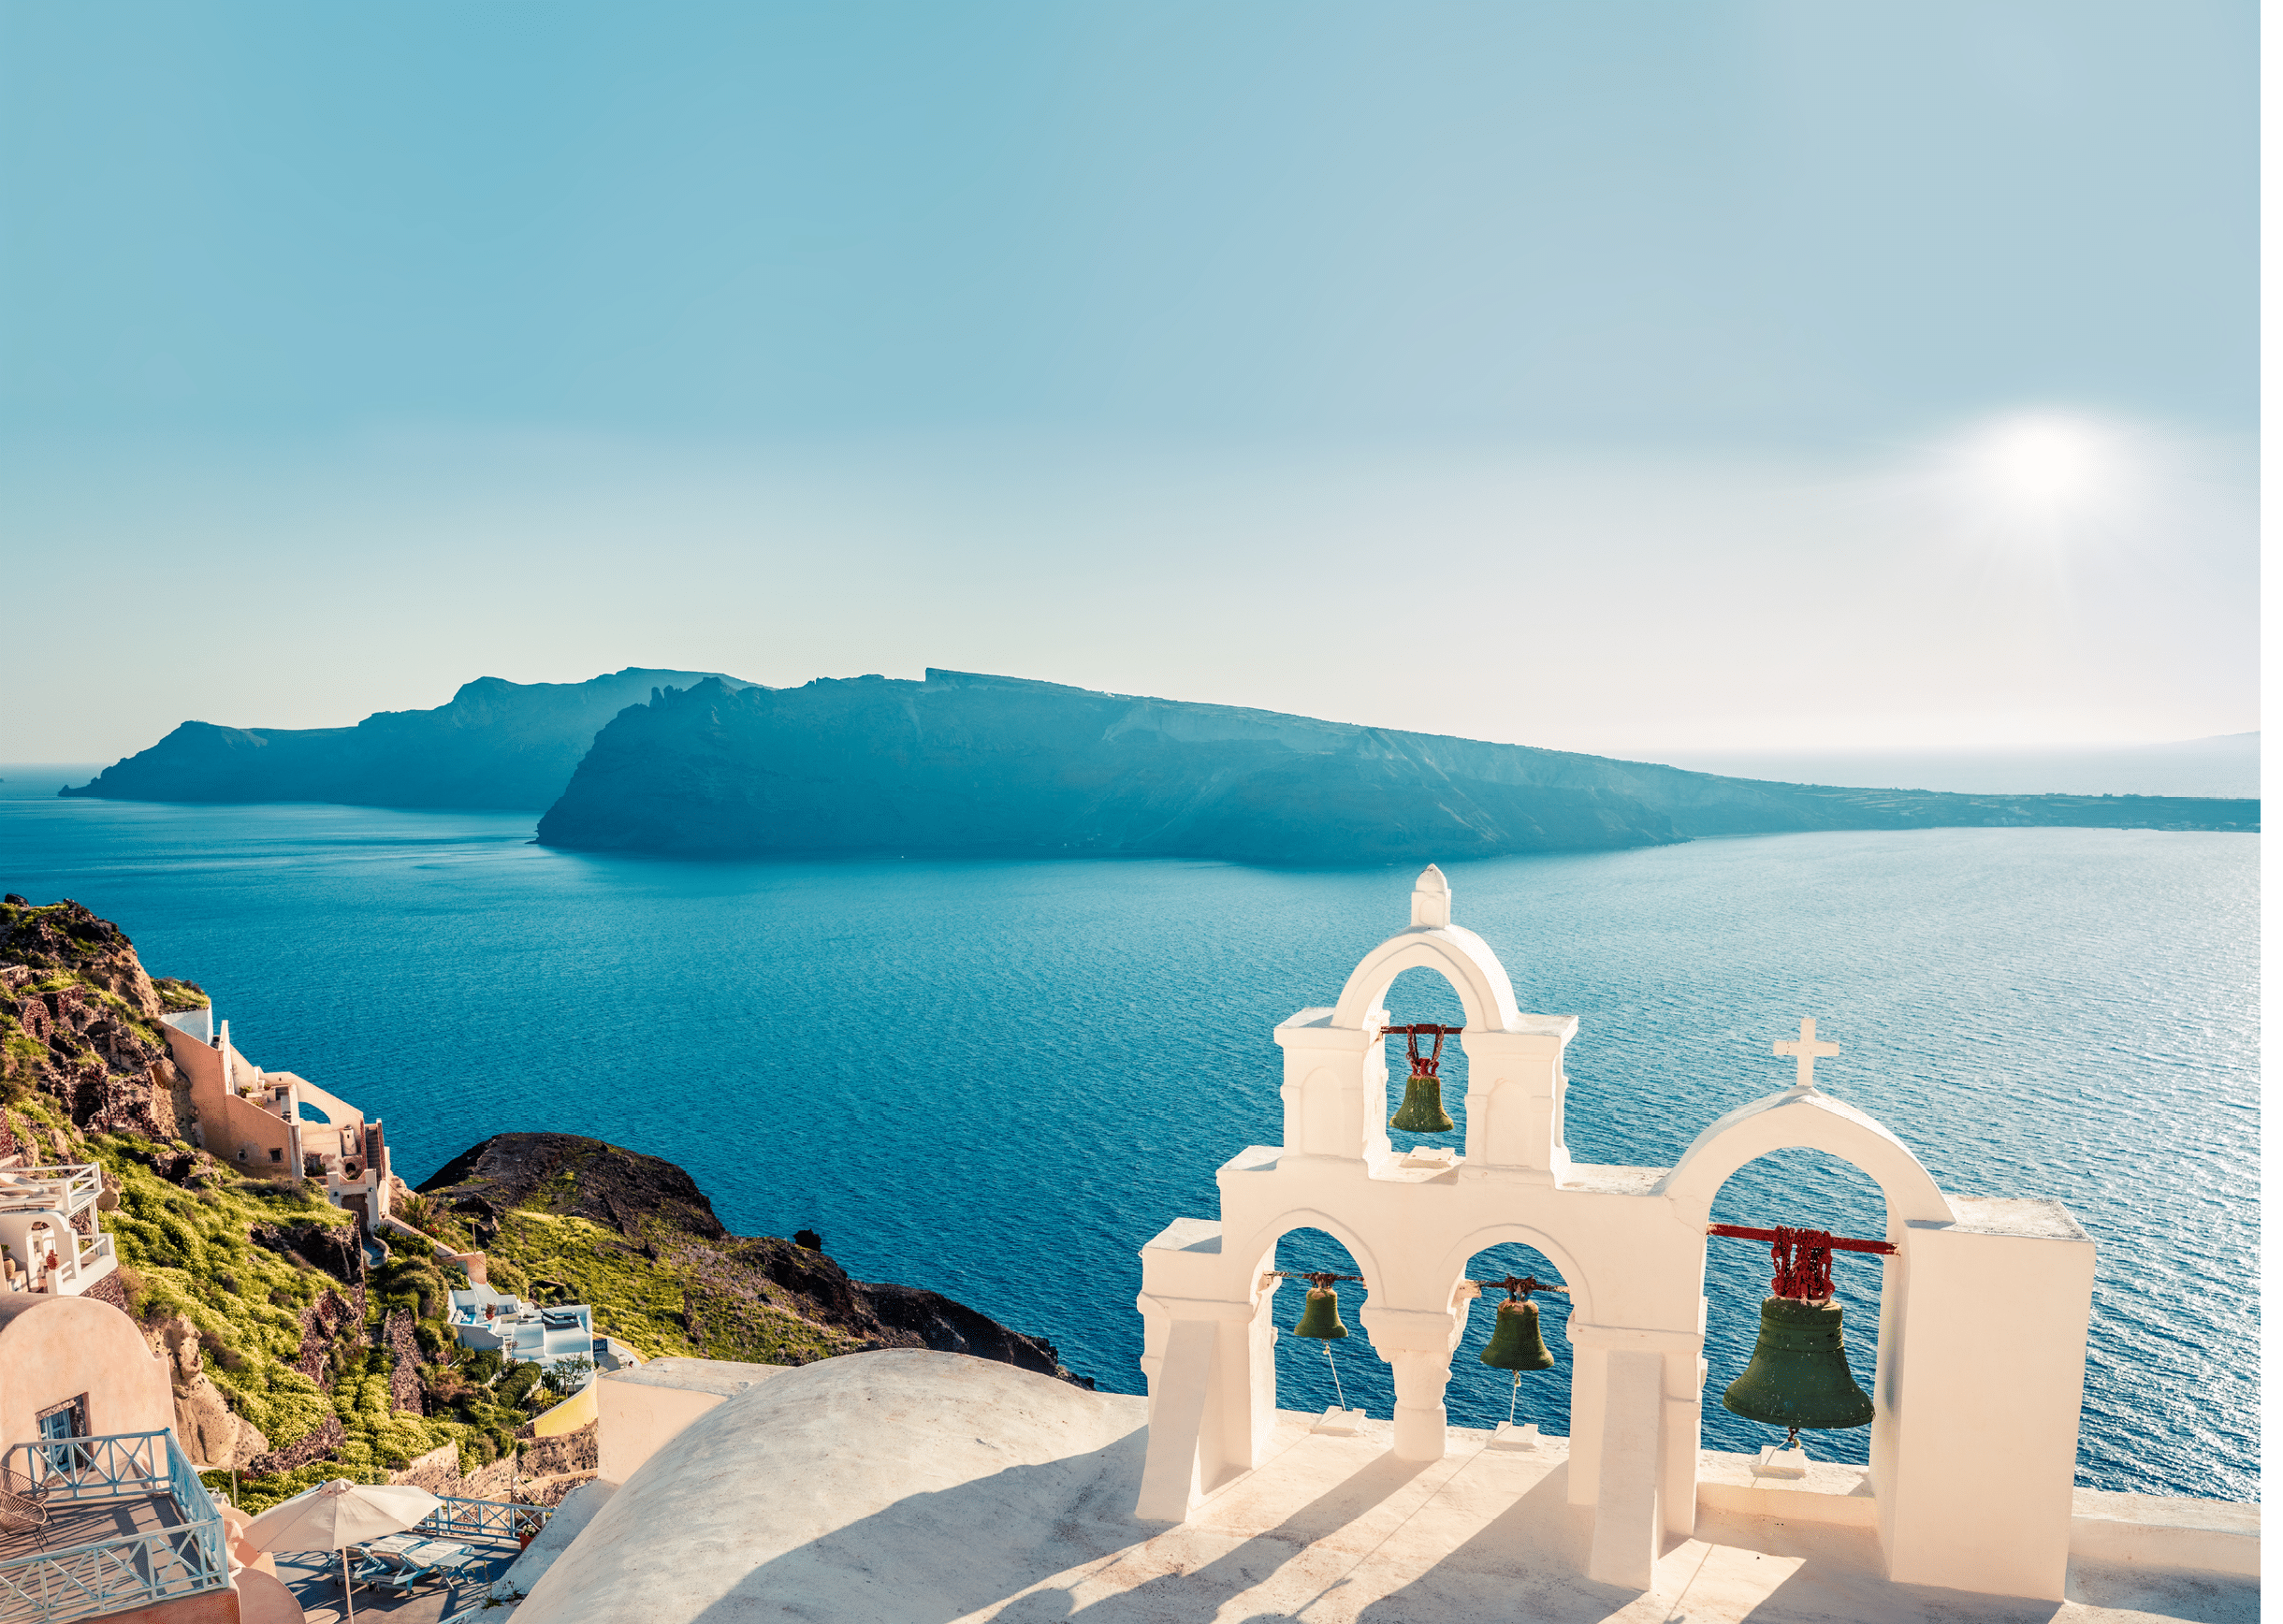 Incredible morning view of Santorini island  Picturesque spring scene of the  famous Greek resort - Fira, Greece, Europe  Traveling concept background  Instagram filter toned  